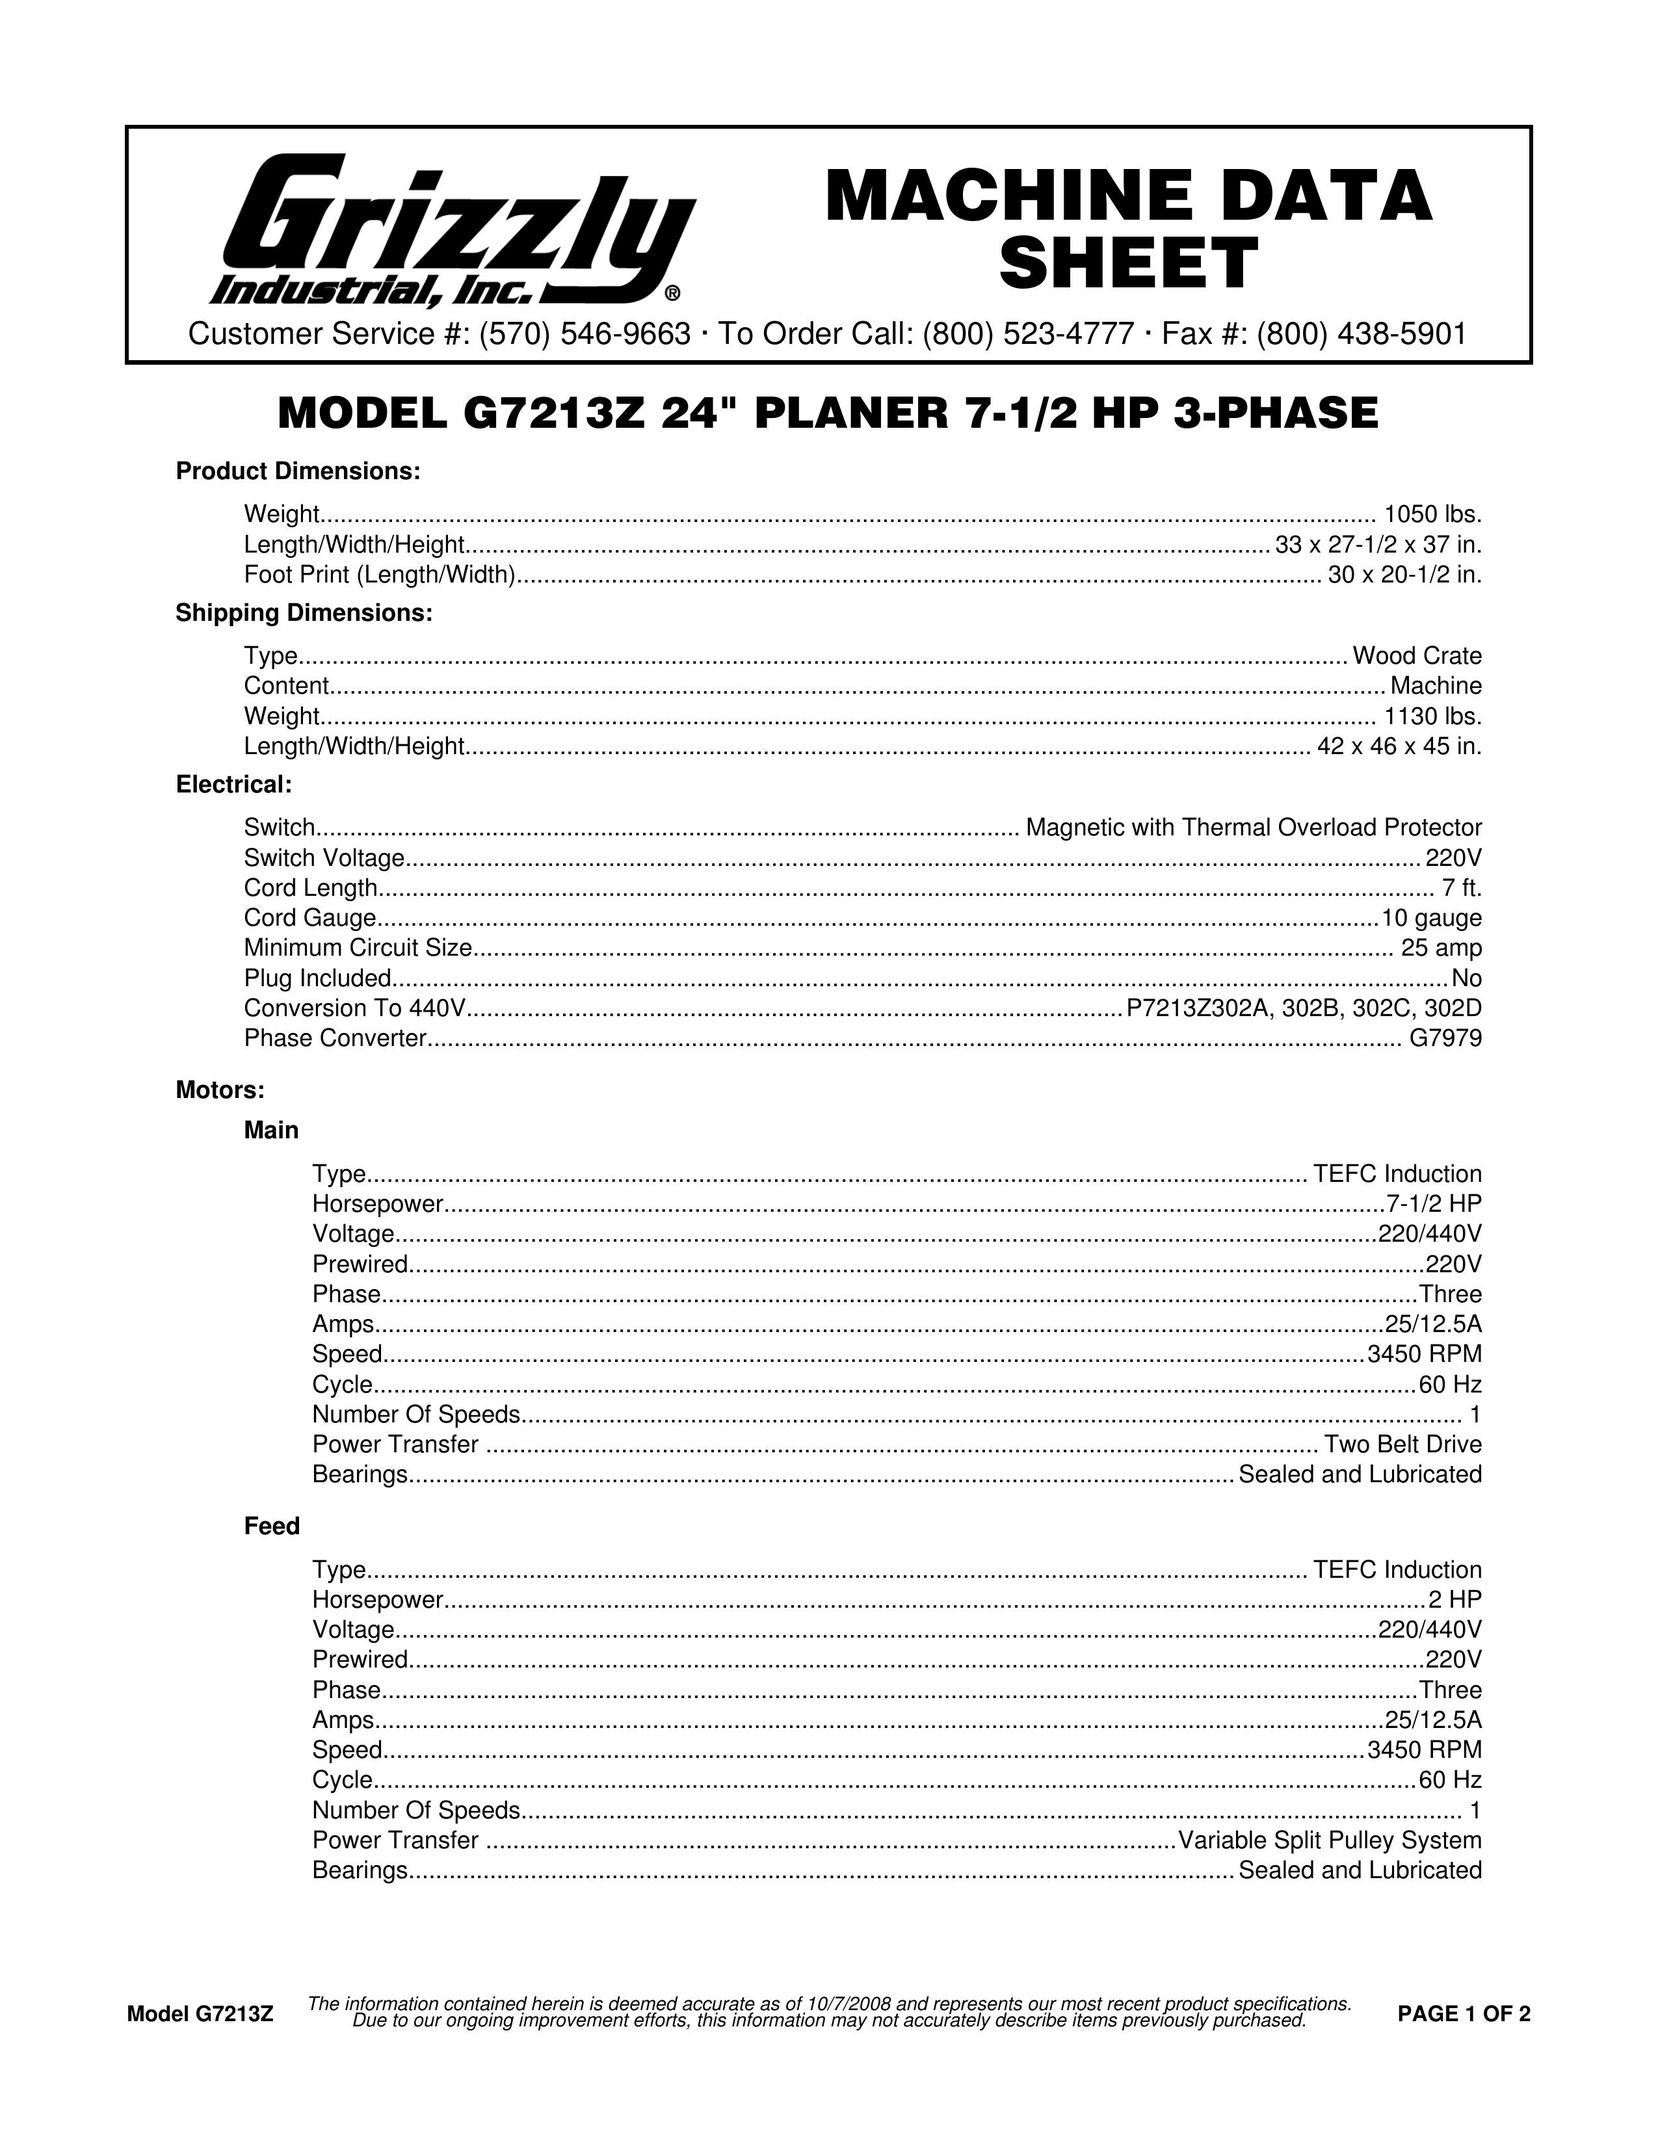 Grizzly G7213Z Planer User Manual